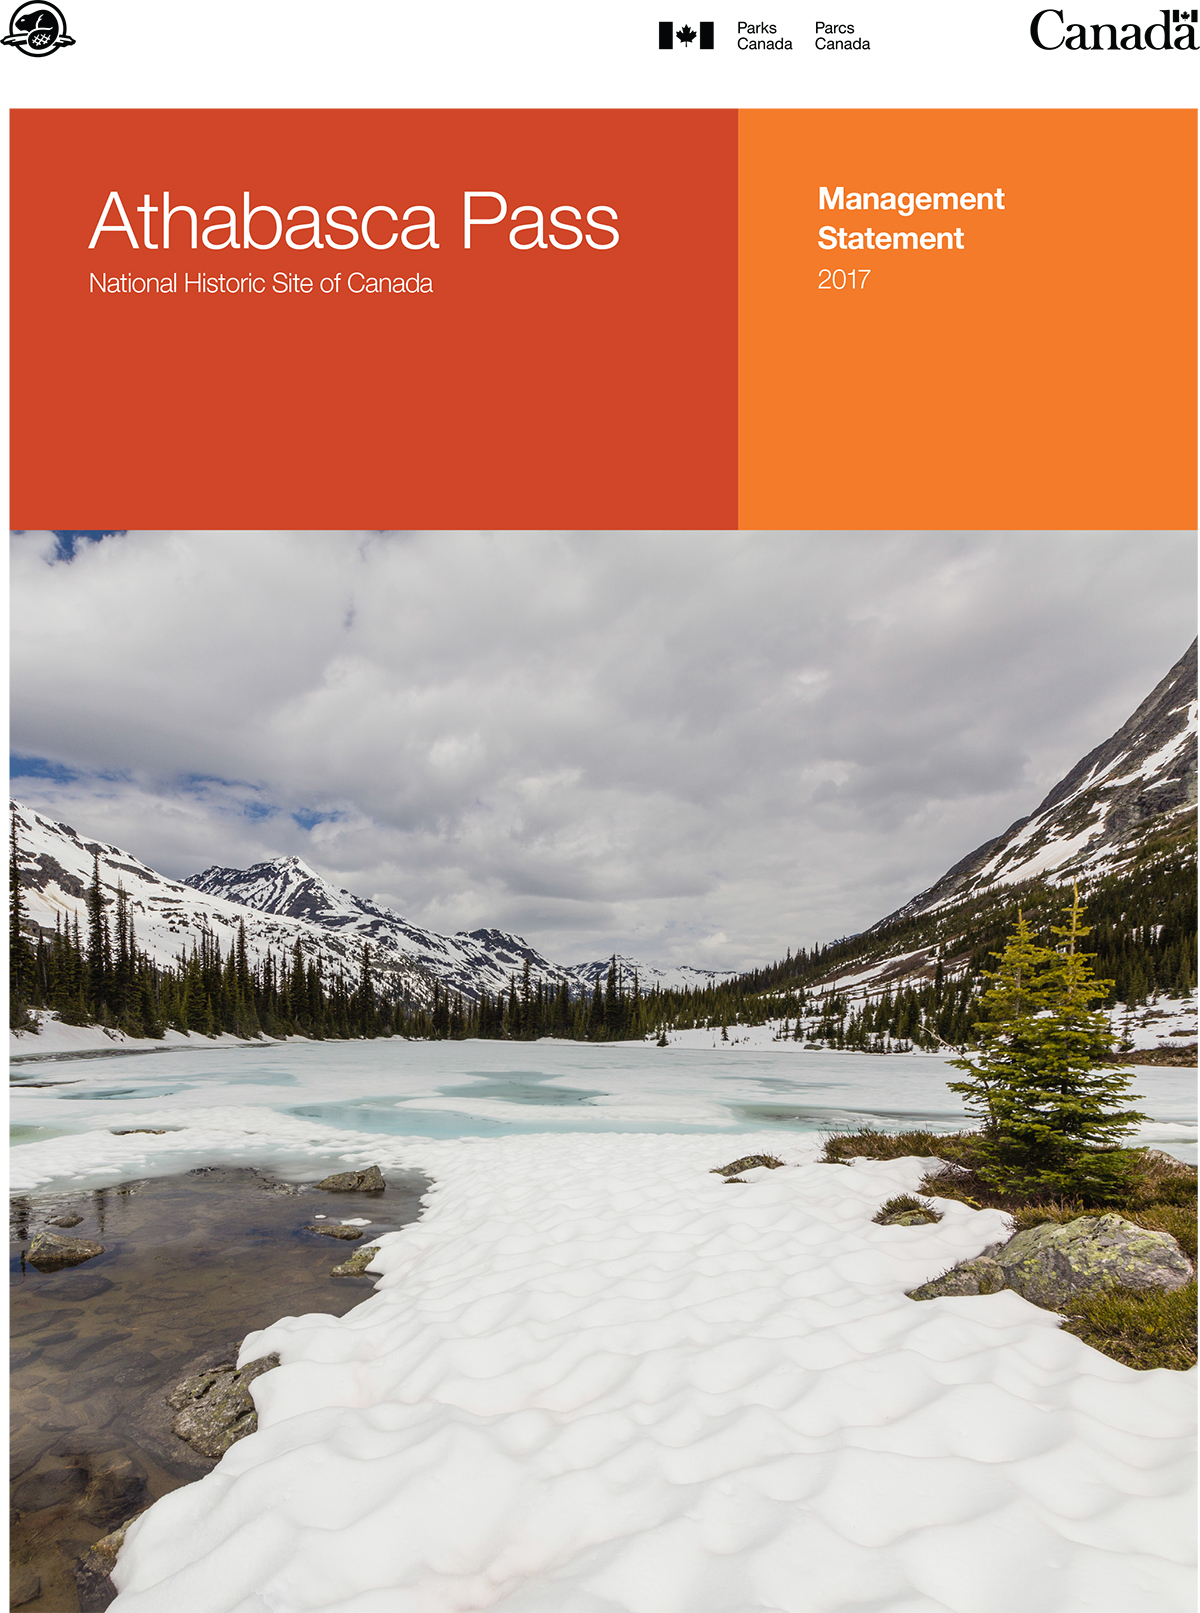 A mountain pass. Two orange rectangles. Written in white text are the words Athabasca Pass National Historic Site of Canada Management Statement 2017